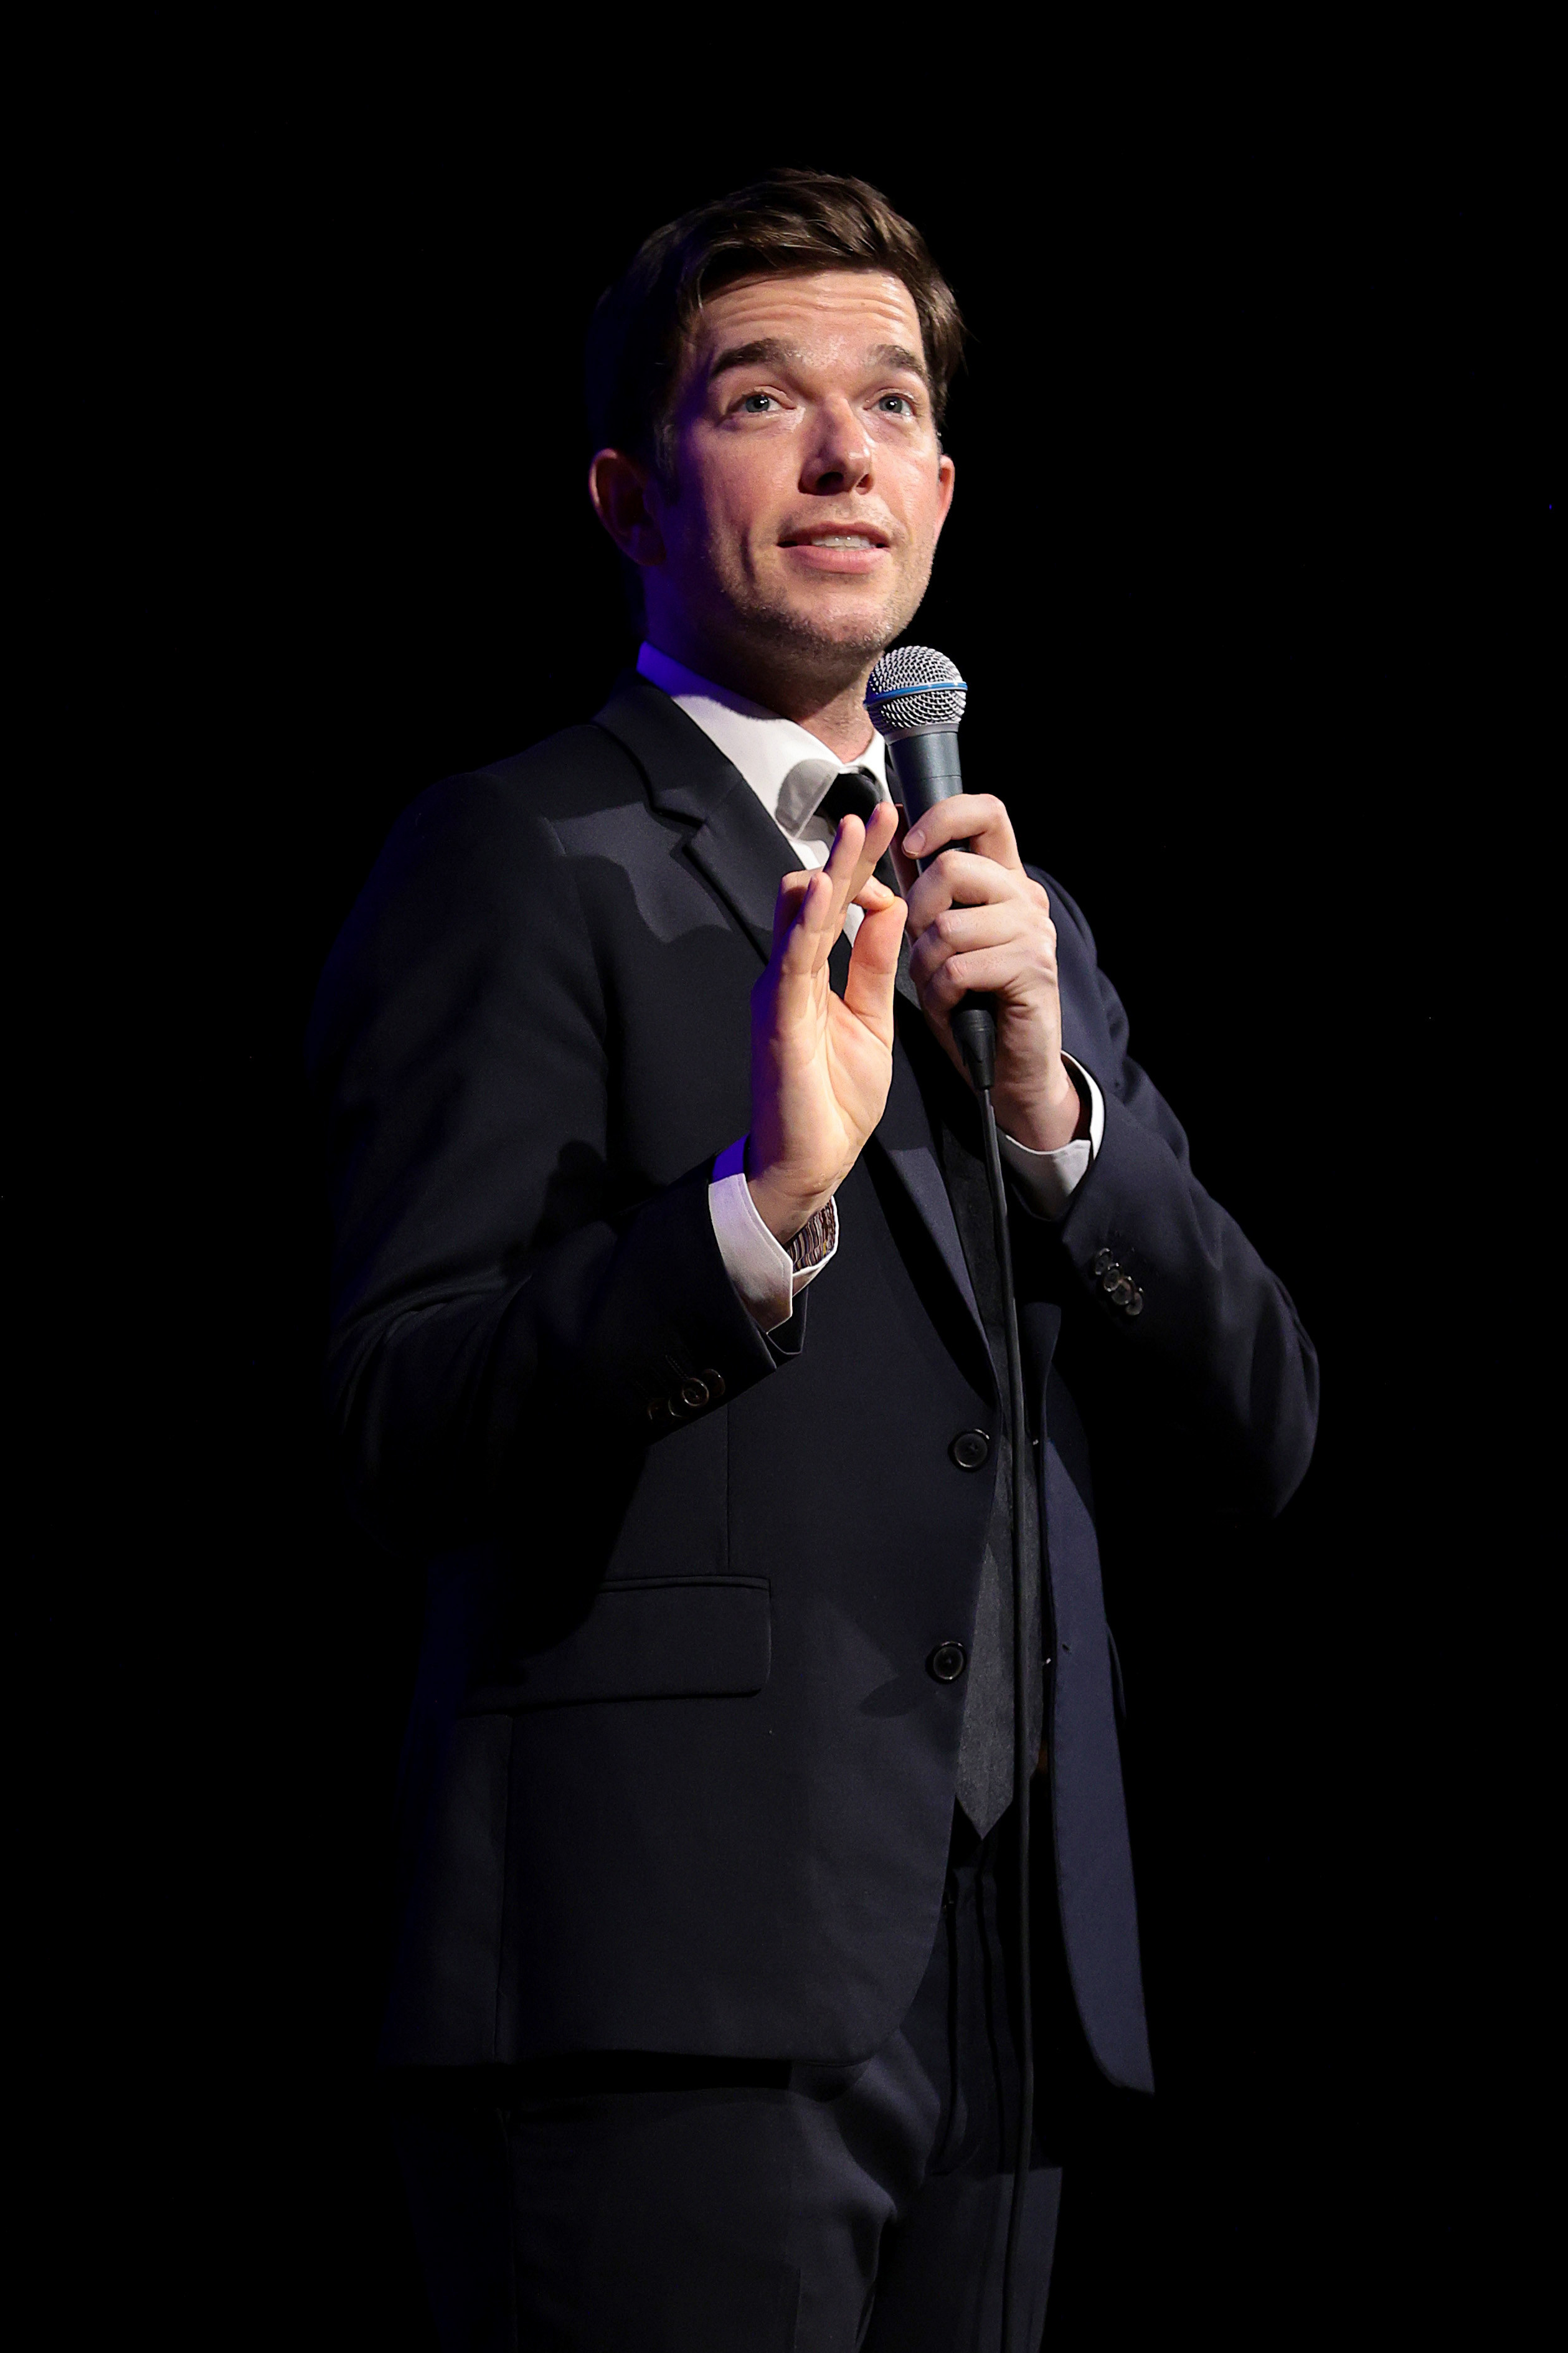 John Mulaney performs for an audience during his &quot;From Scratch&quot; tour on September 01, 2021 in New York City